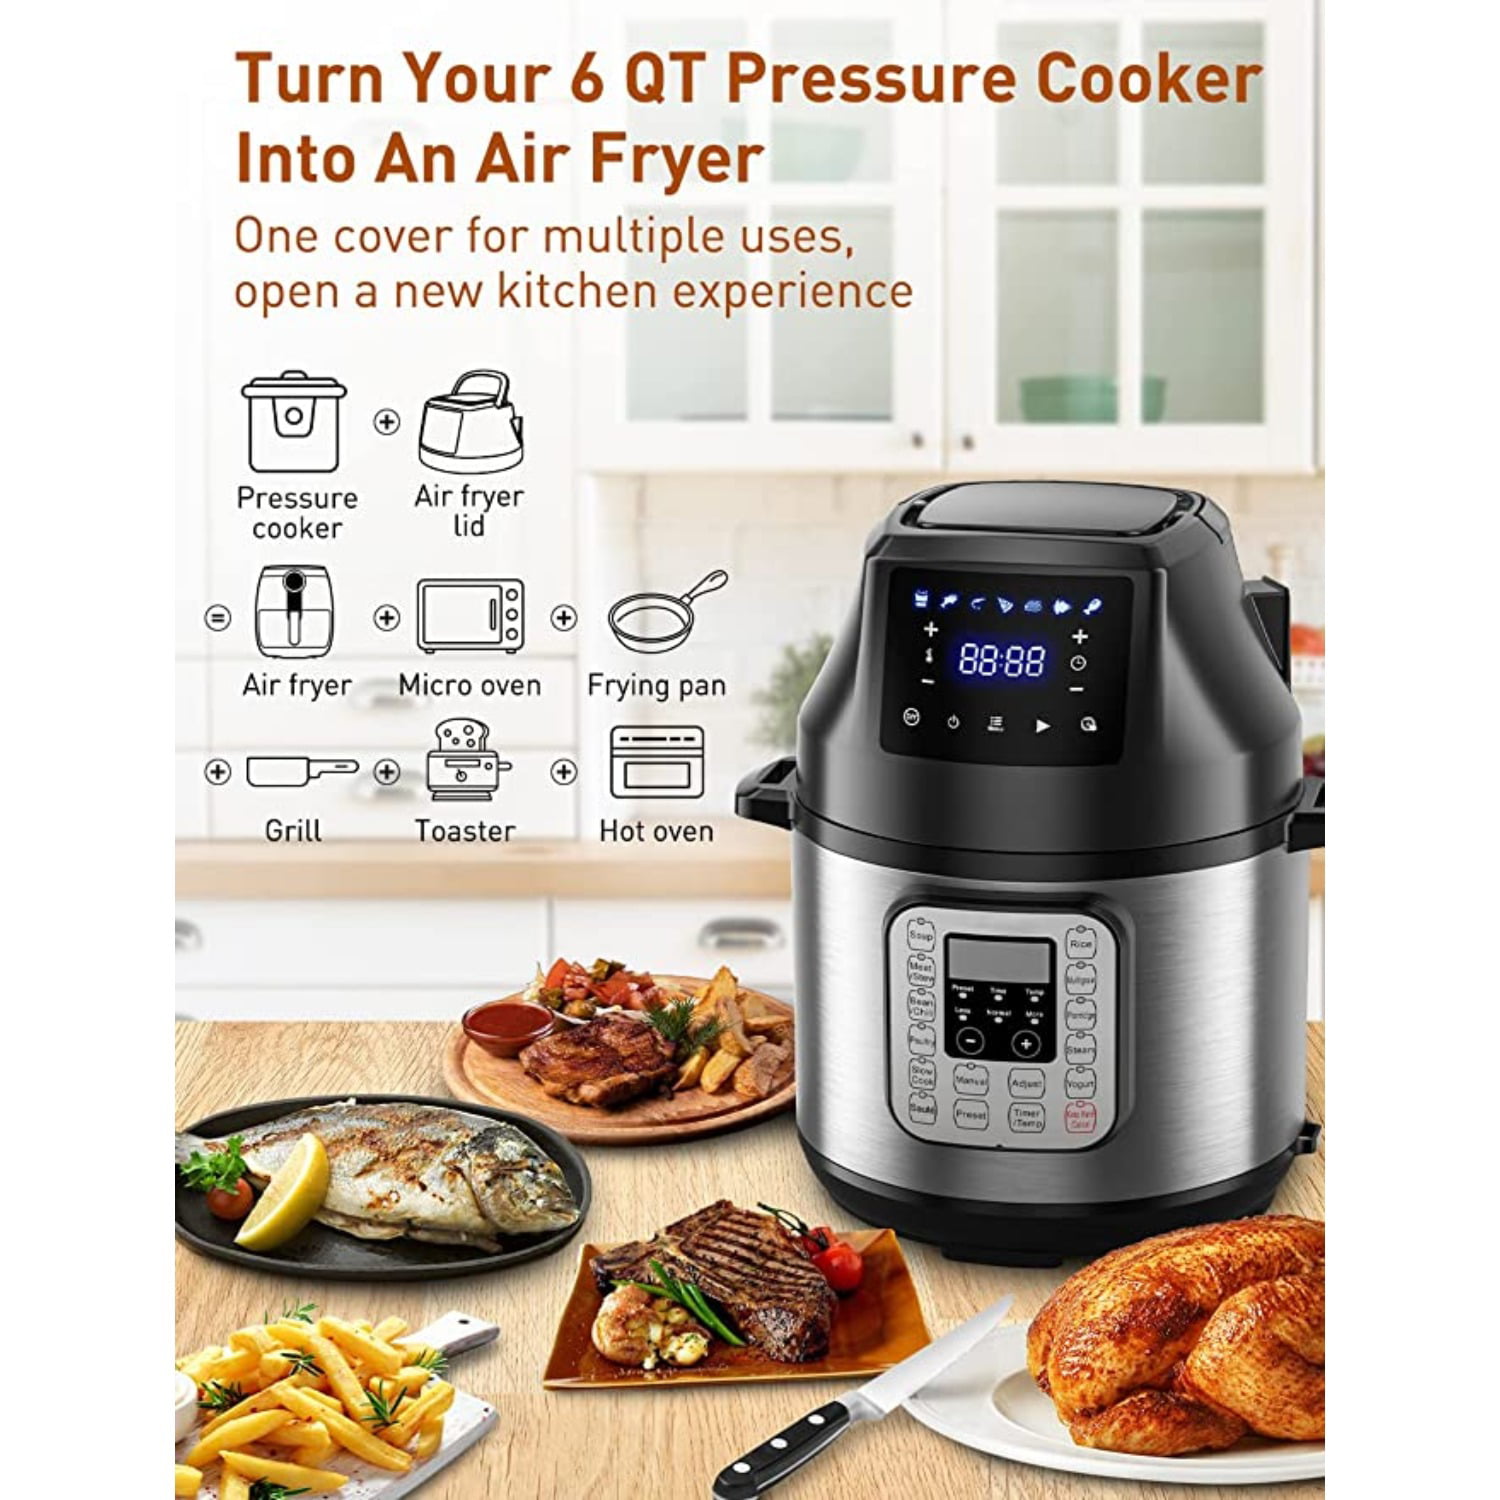 Is it safe to use the air fryer lid of Instant Pot Pro Plus Wi-Fi